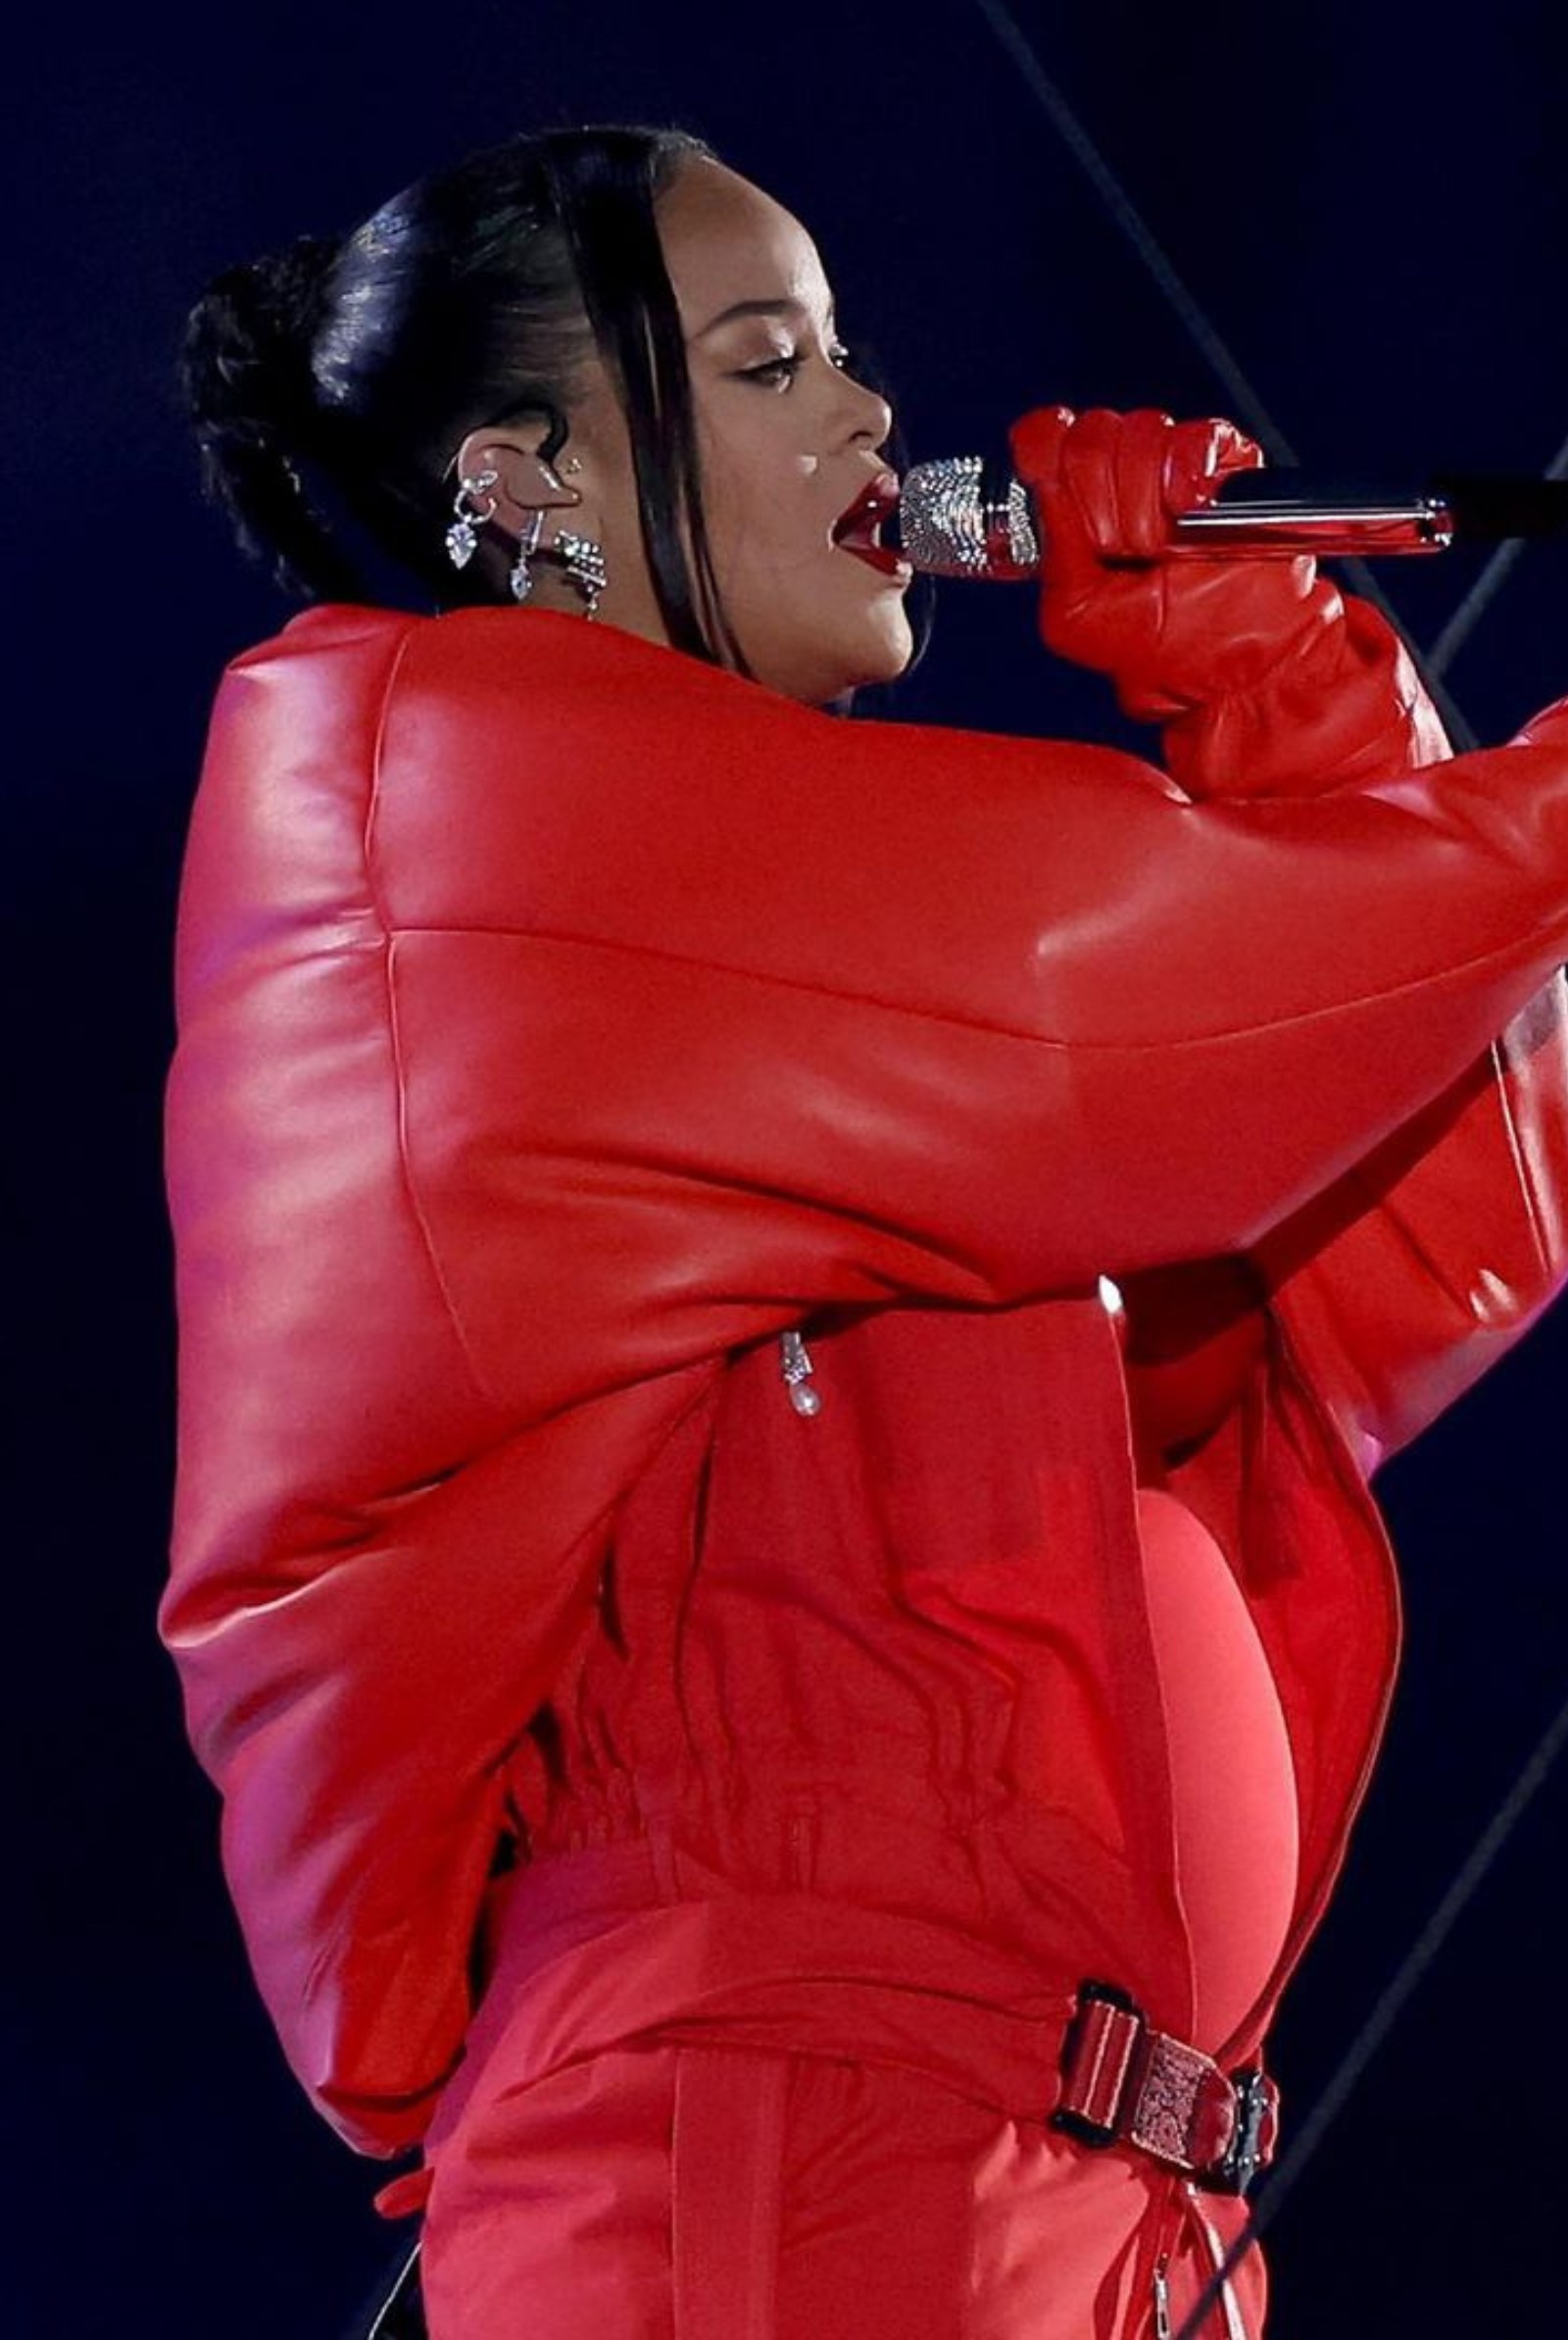 Highlights From Rihanna's Blazing Performance at the Super Bowl